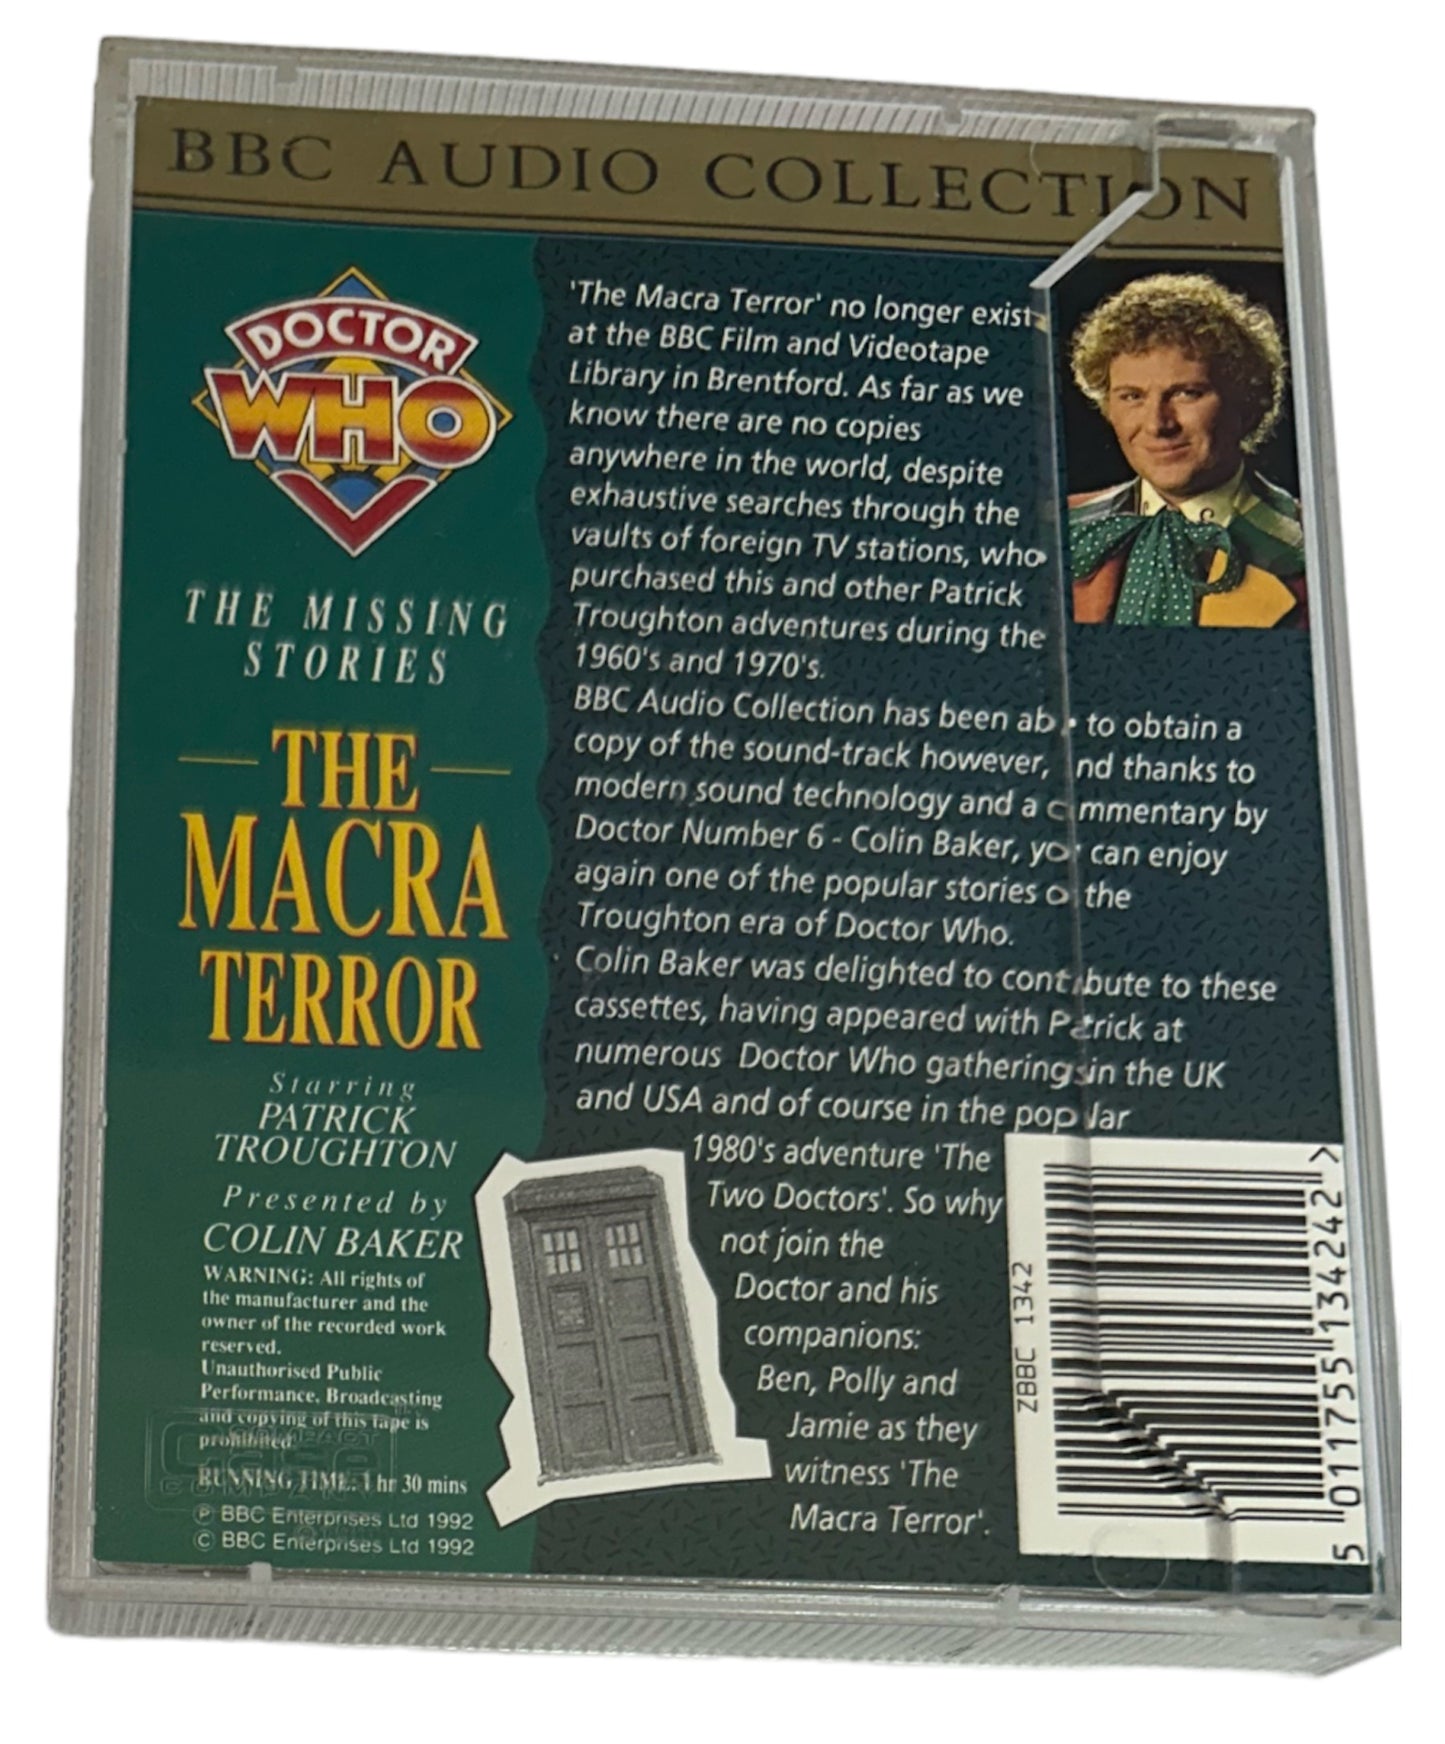 Vintage 1992 BBCs Radio Collection - Doctor Dr Who - The Missing Stories - The Macra Terror Starring Patrick Troughton - Double Audio Cassette Set - Shop Stock Room Find